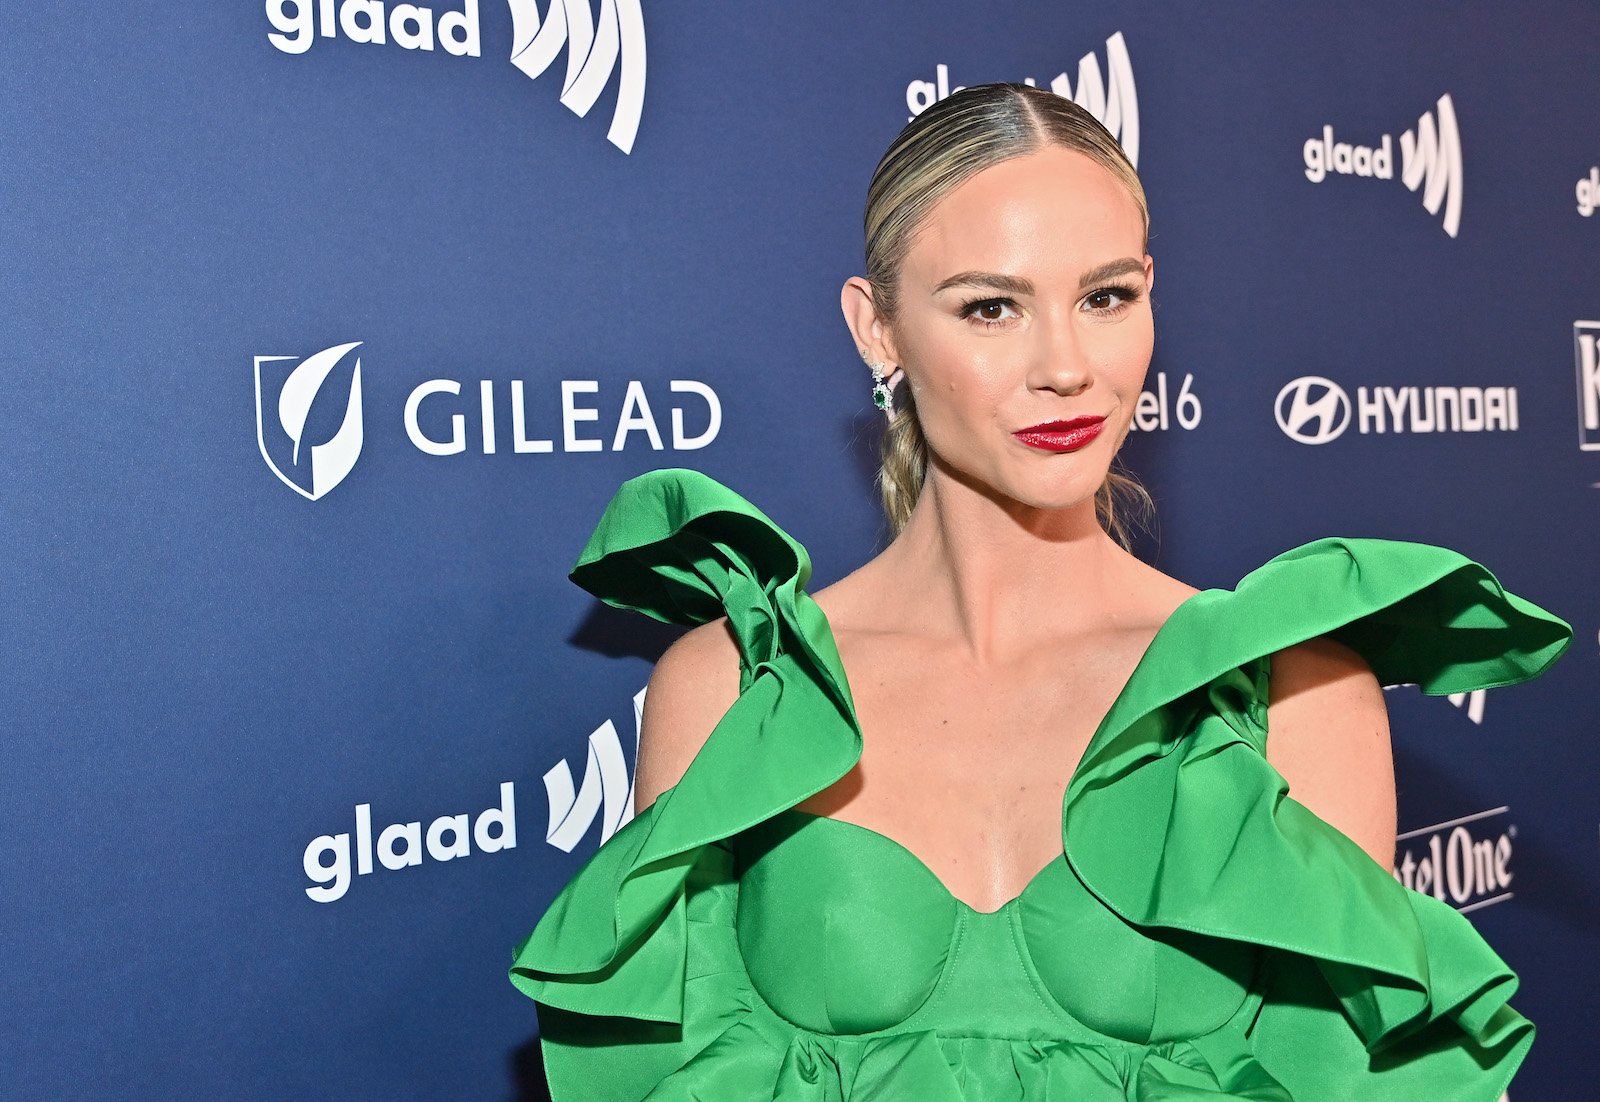 Meghan O'Toole King wearing a green dress on the red carpet at an event